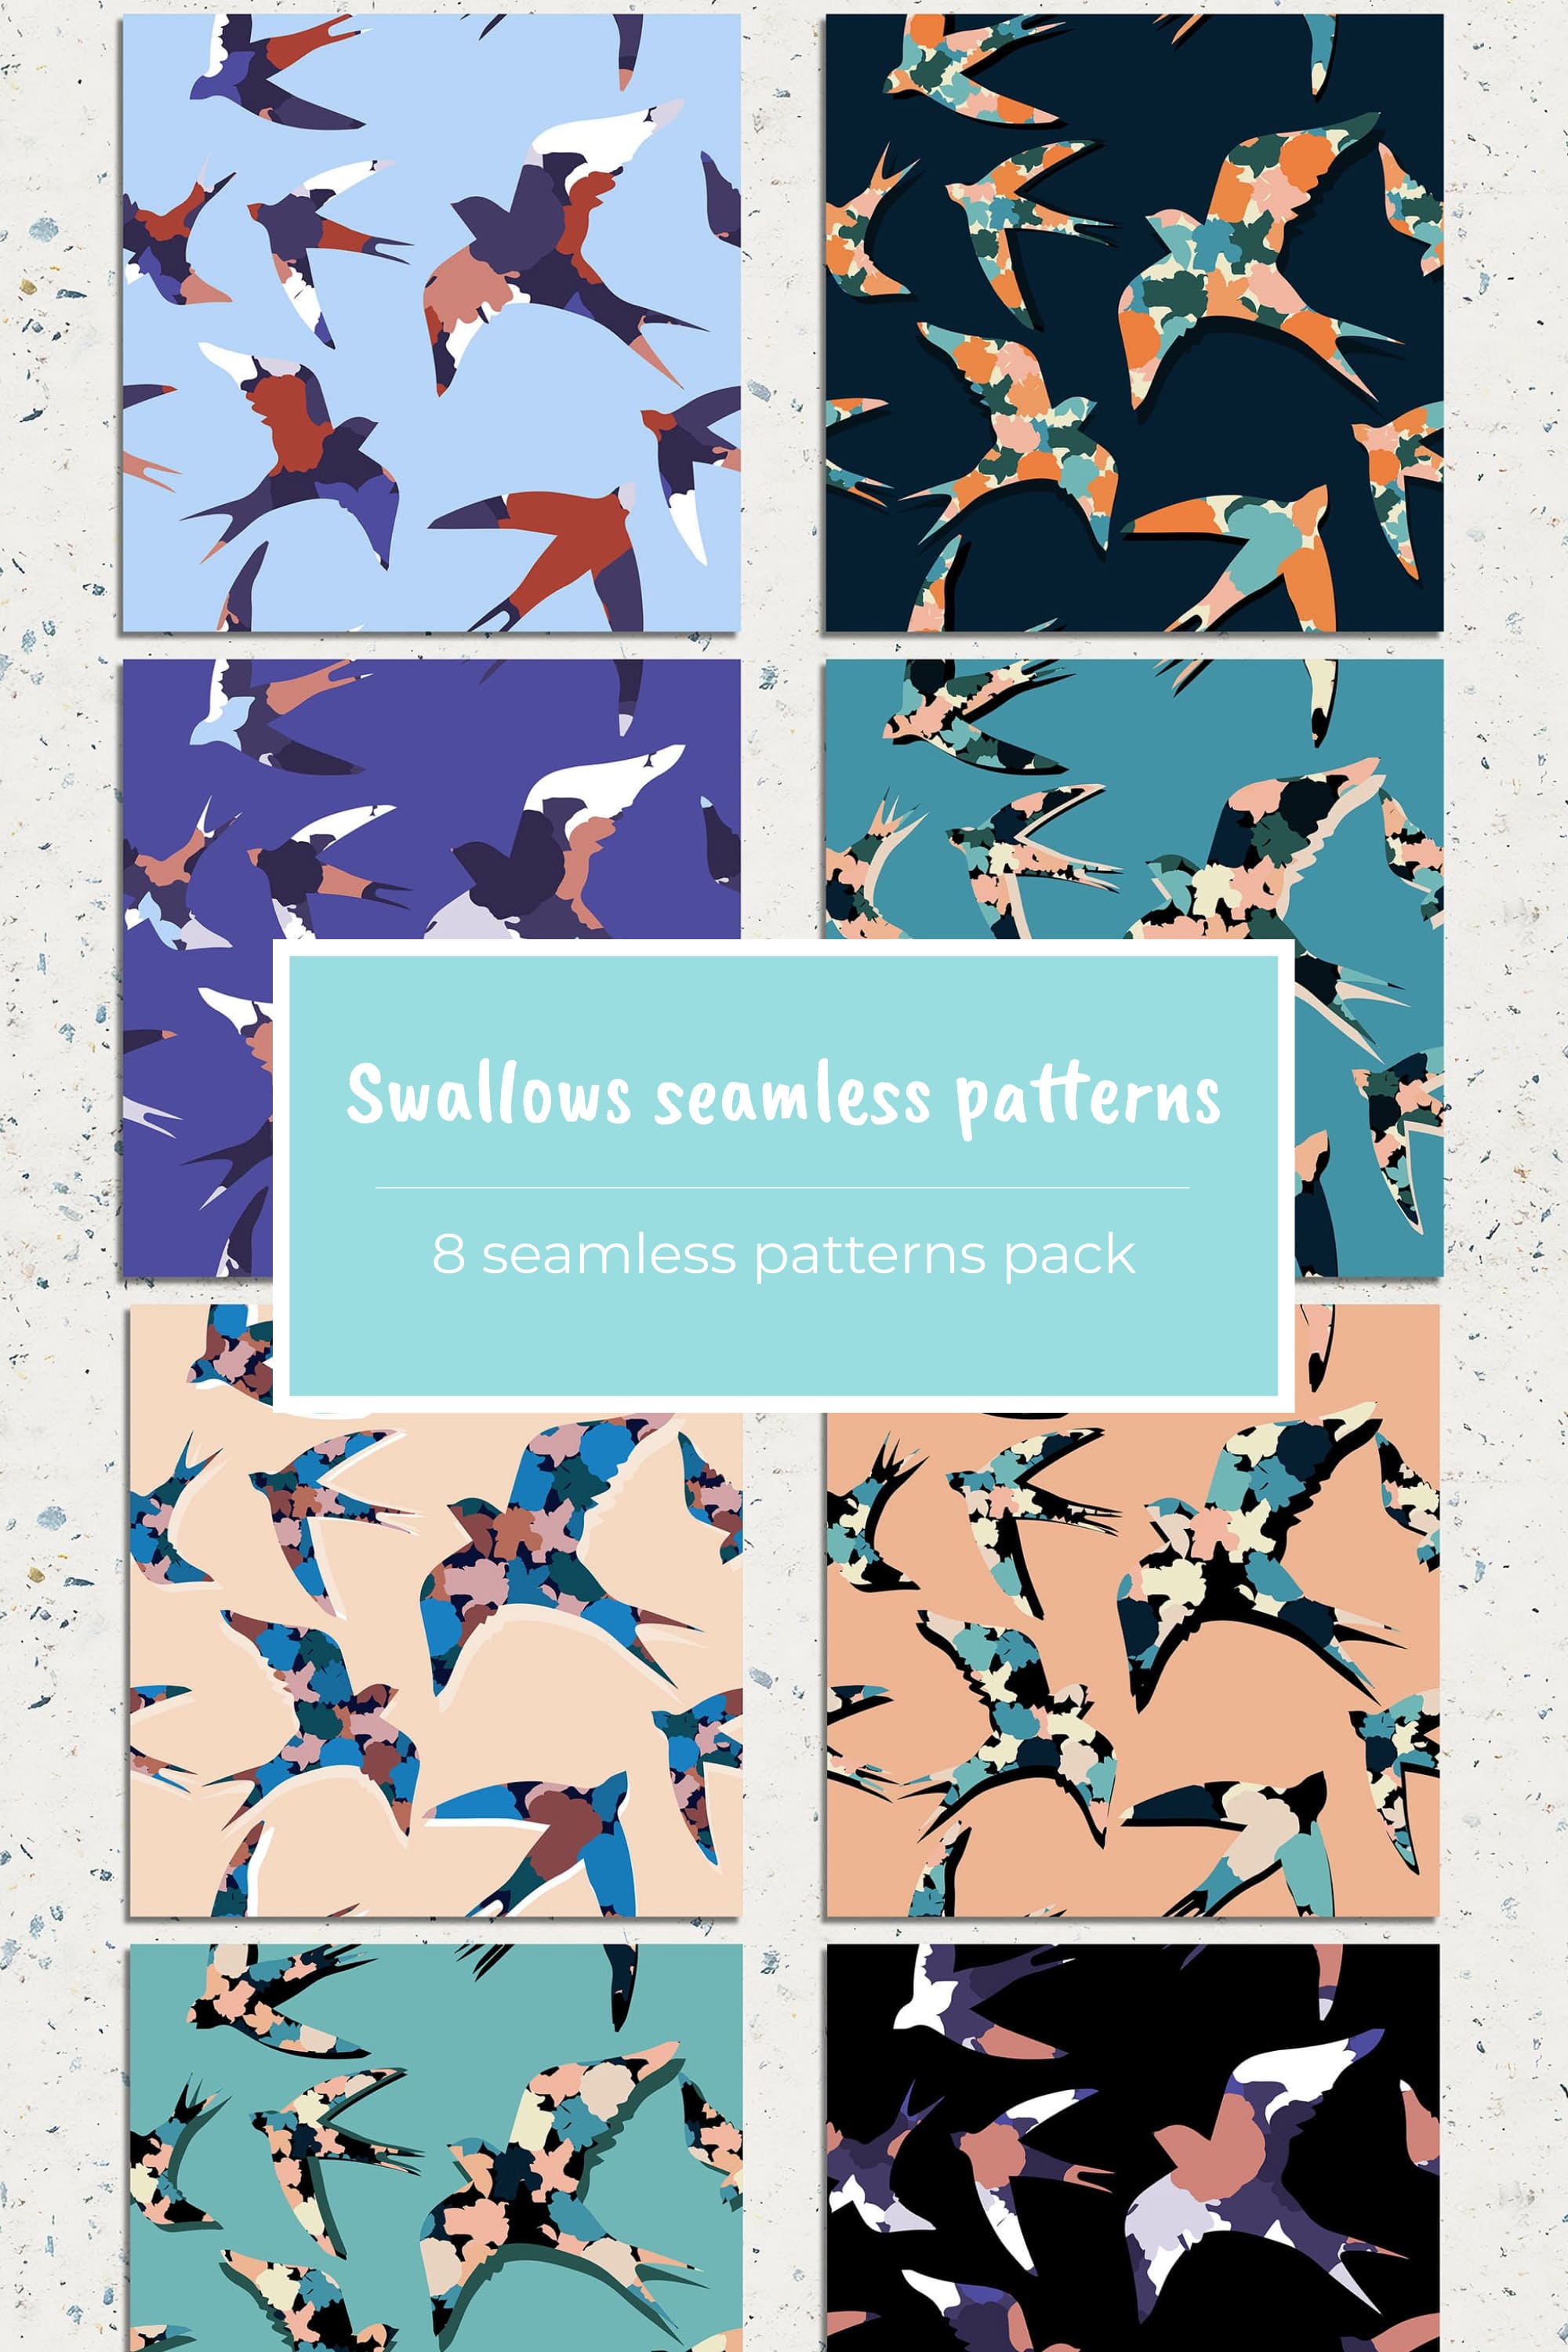 Swallows seamless patterns - pinterest image preview.